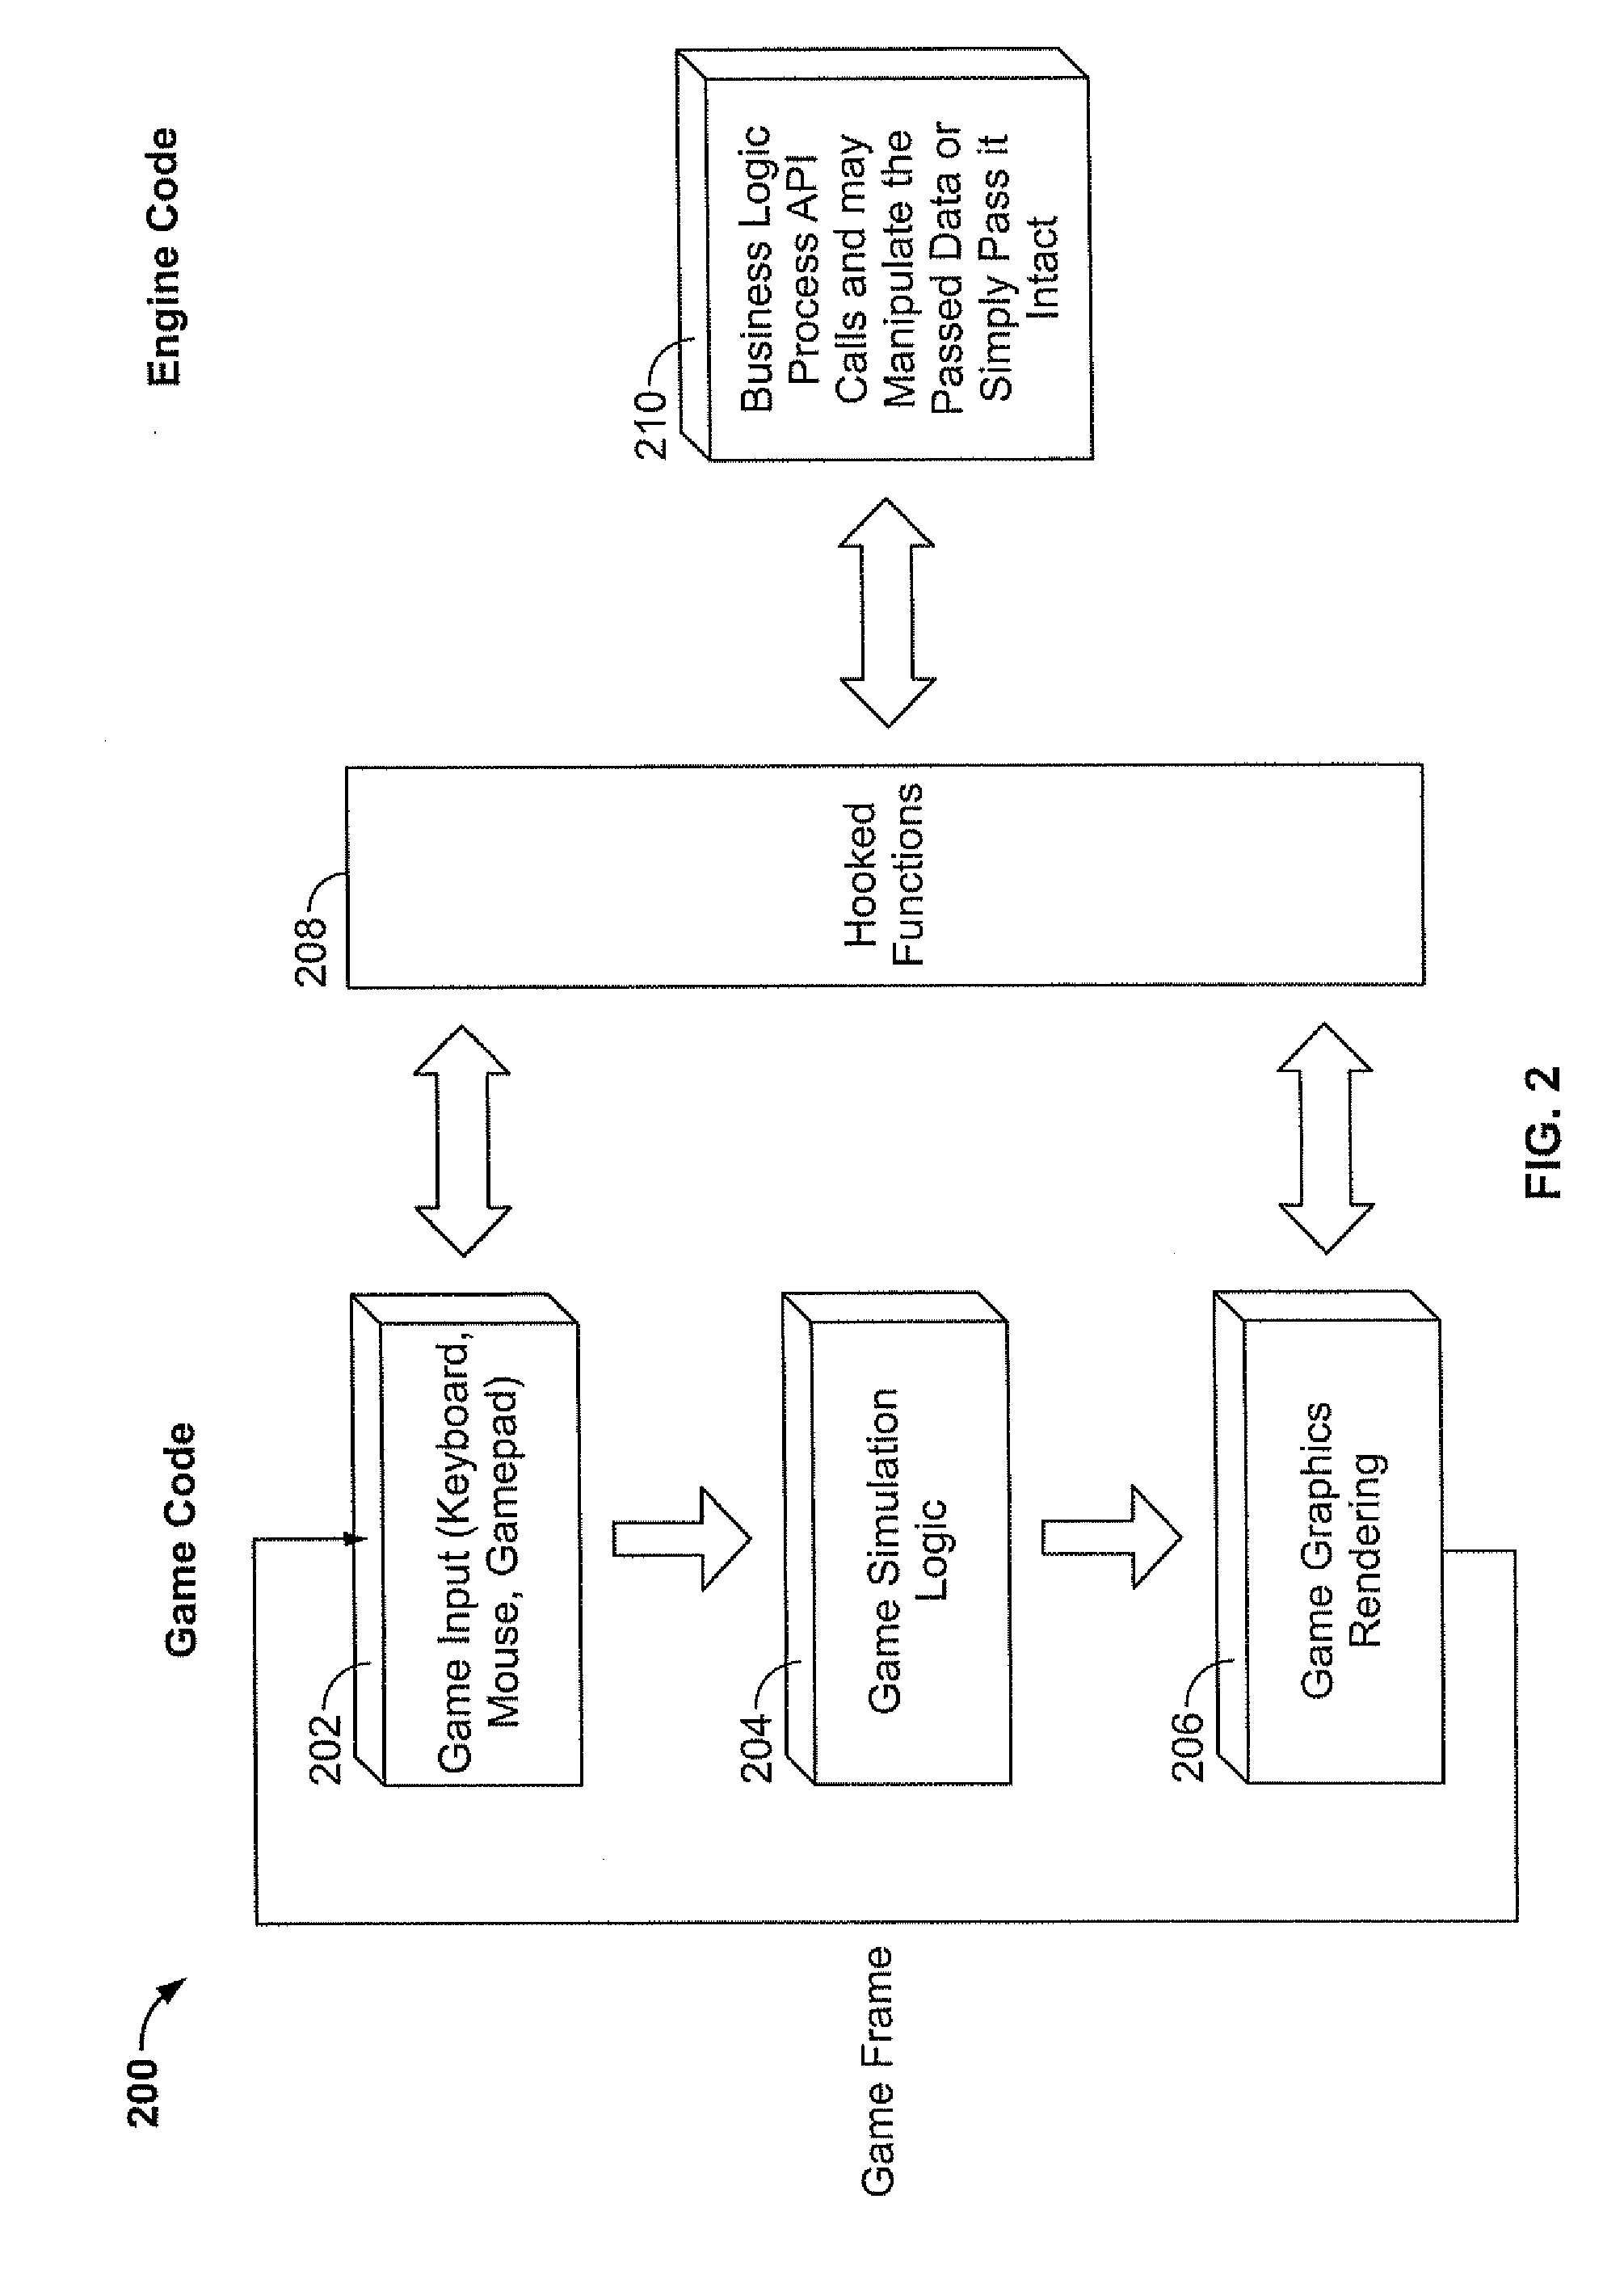 Independently-defined alteration of output from software executable using distributed alteration engine